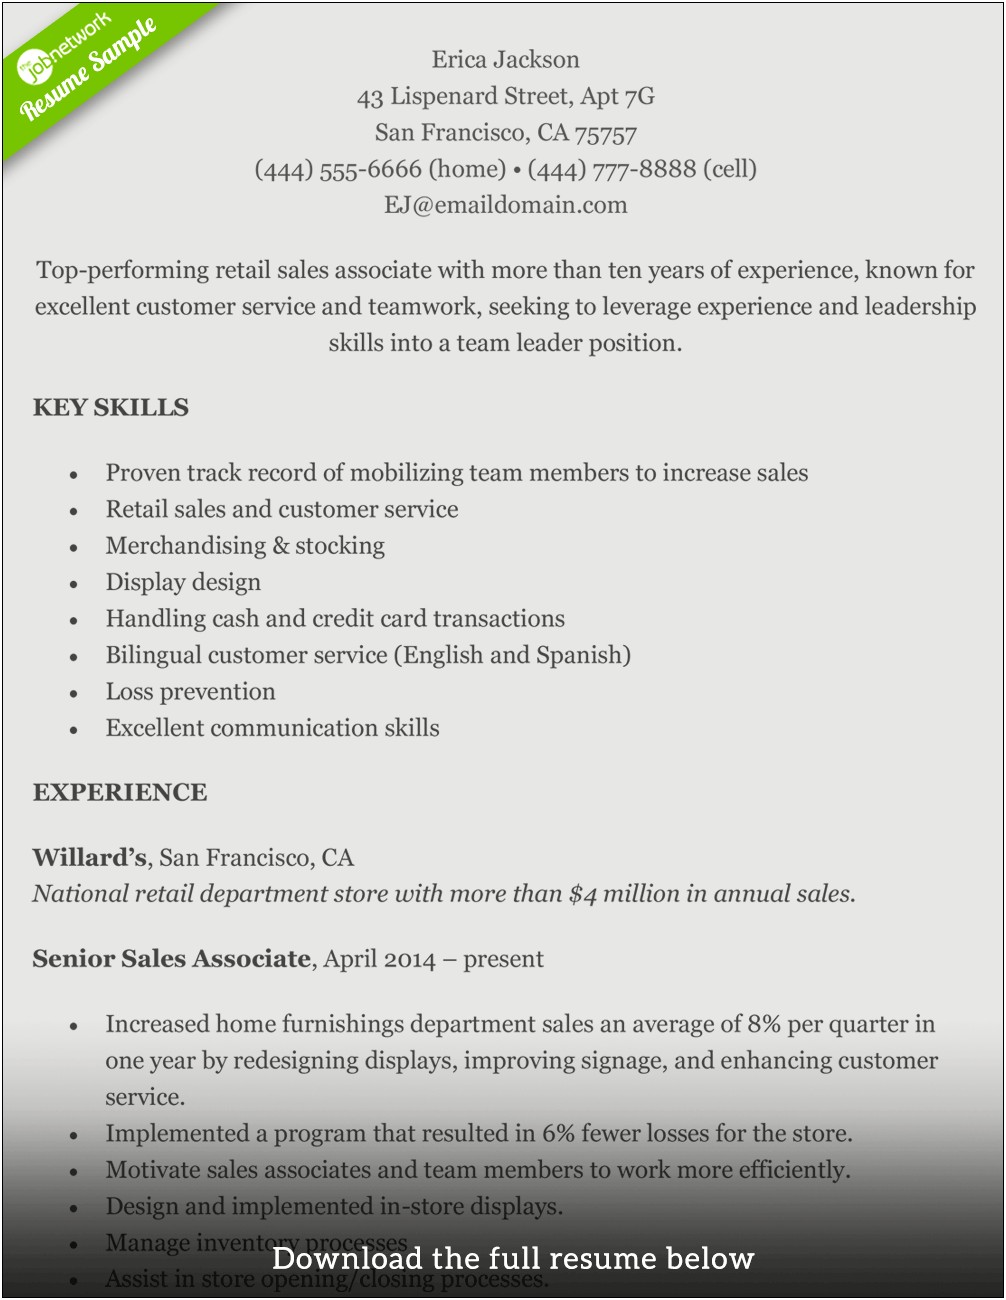 Resume Works For Store Set Up